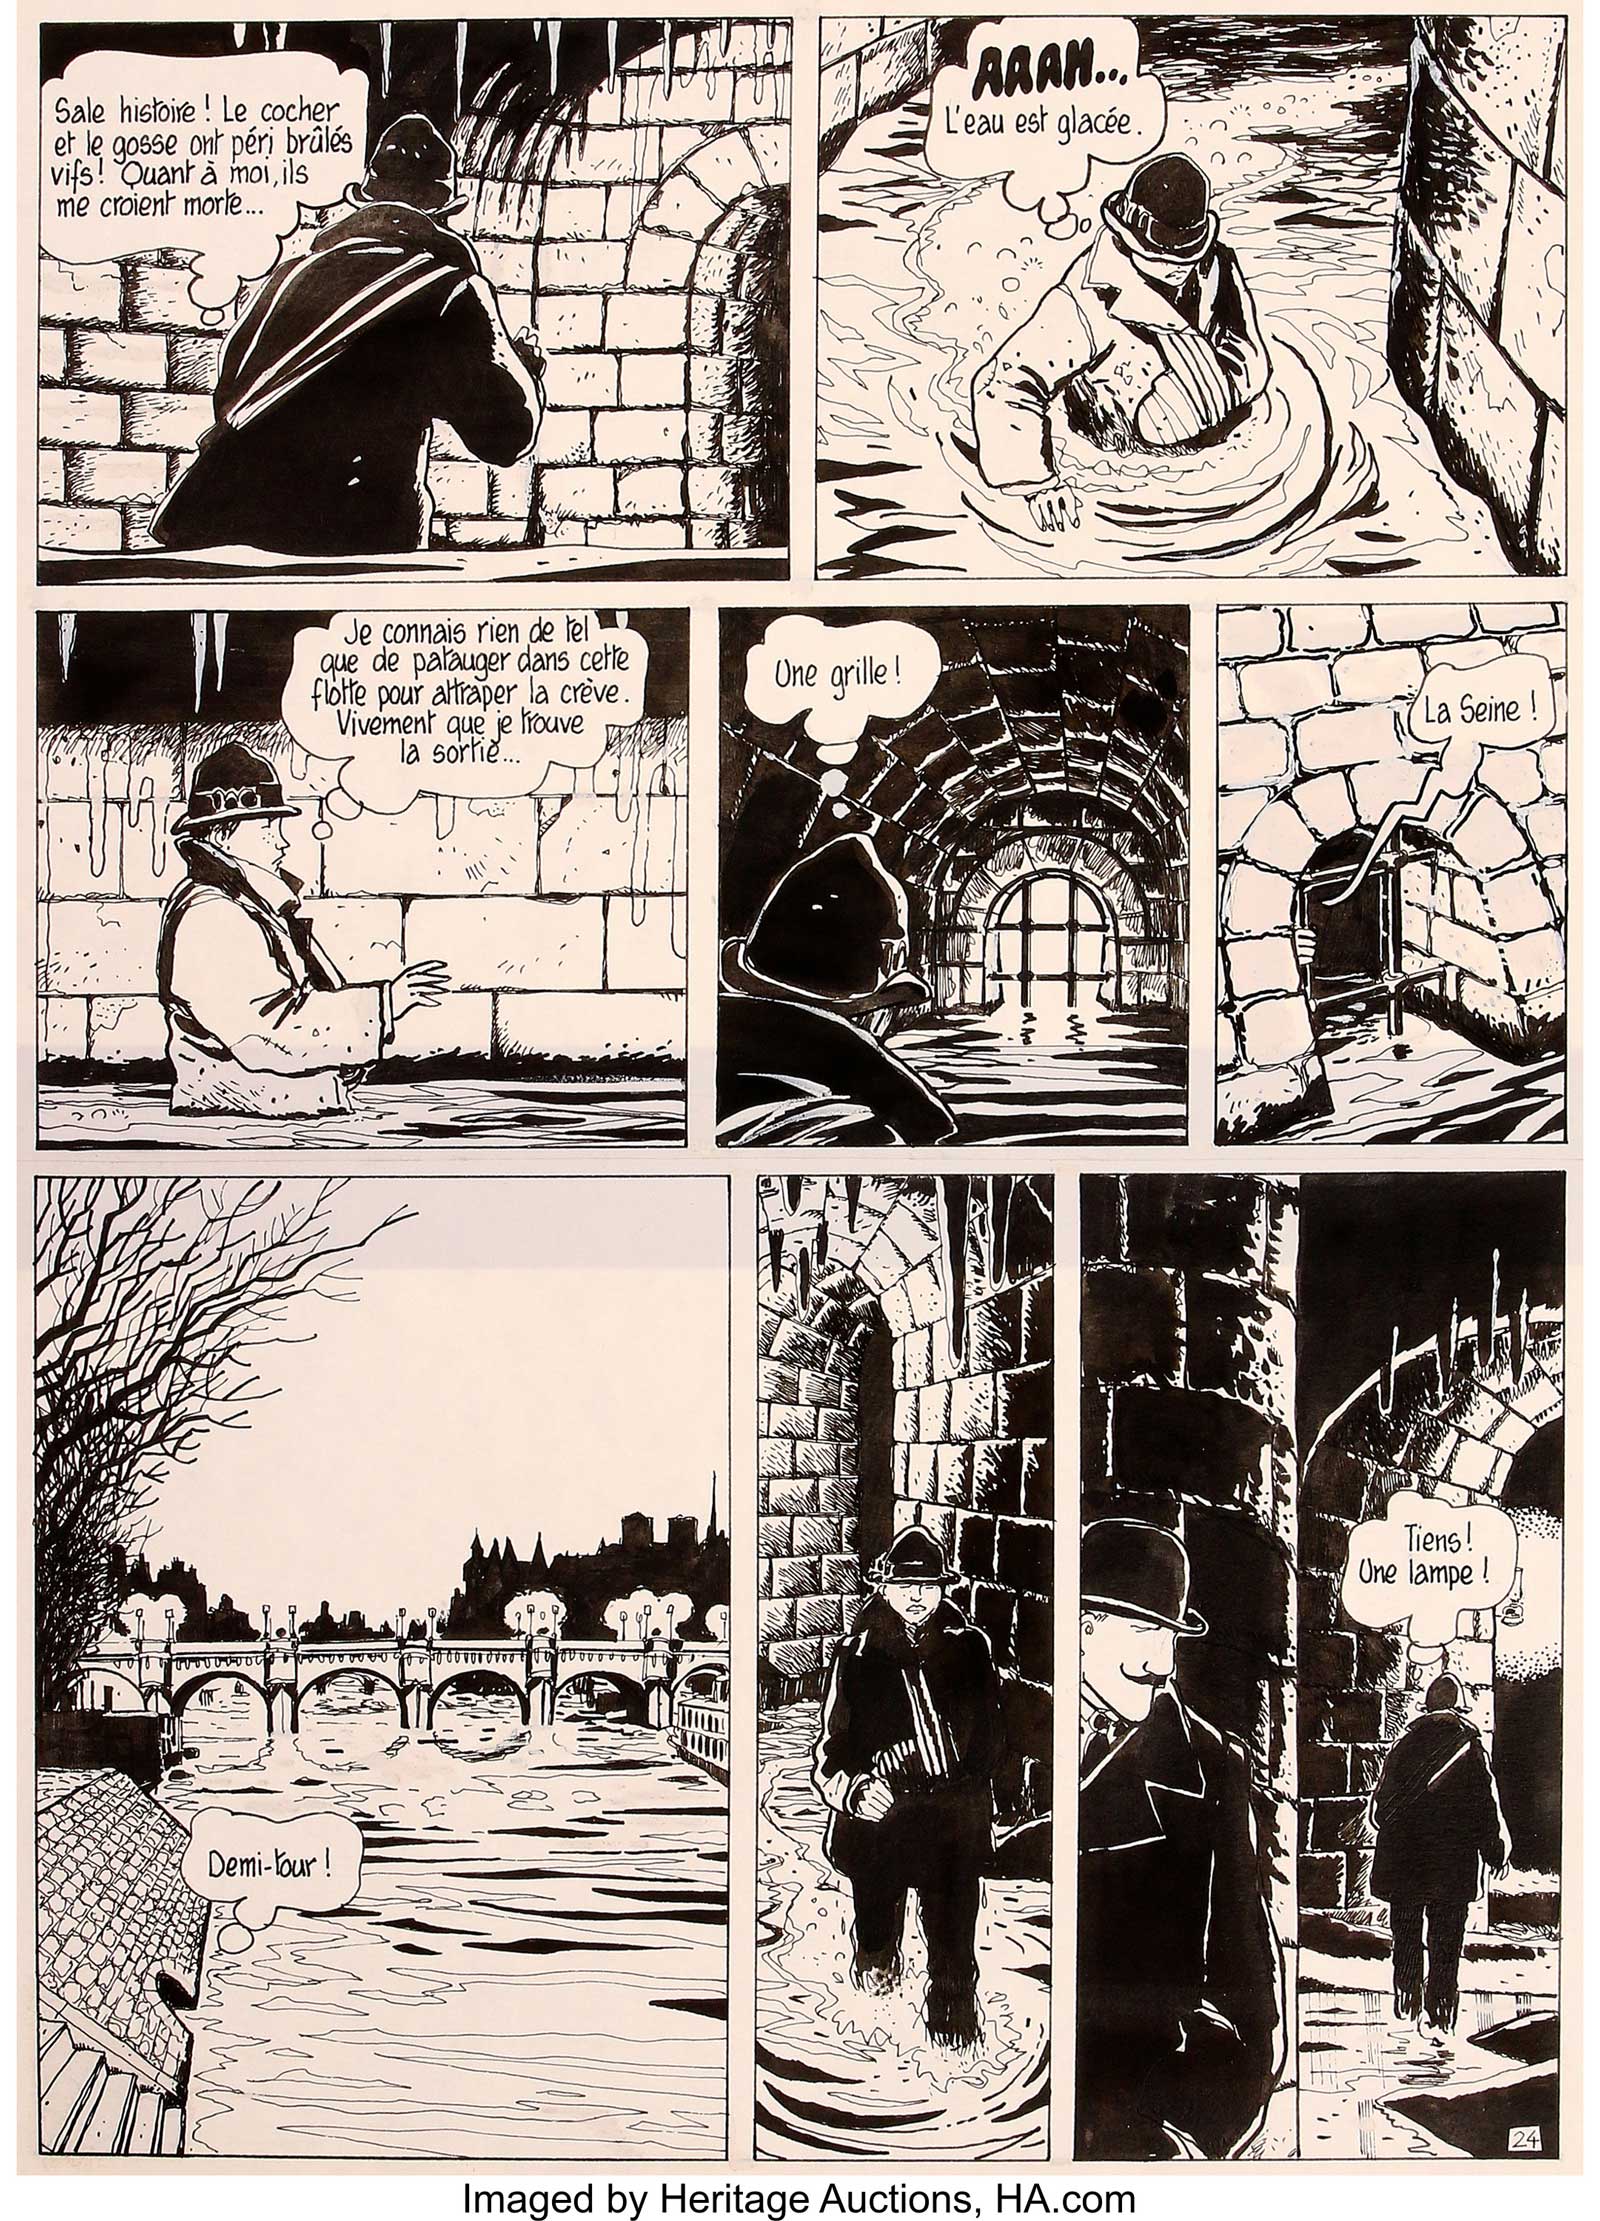 Jacques Tardi Adèle Blanc-Sec Vol.2 "The Eiffel Tower Demon" Page 24 Original Art (Casterman, 1976). "The Eiffel Tower Demon" is the greatest adventure of Adèle Blanc-Sec. Tardi recreates the evocative locales of Paris, transporting us here into the subterranean worlds beneath the City of Light.